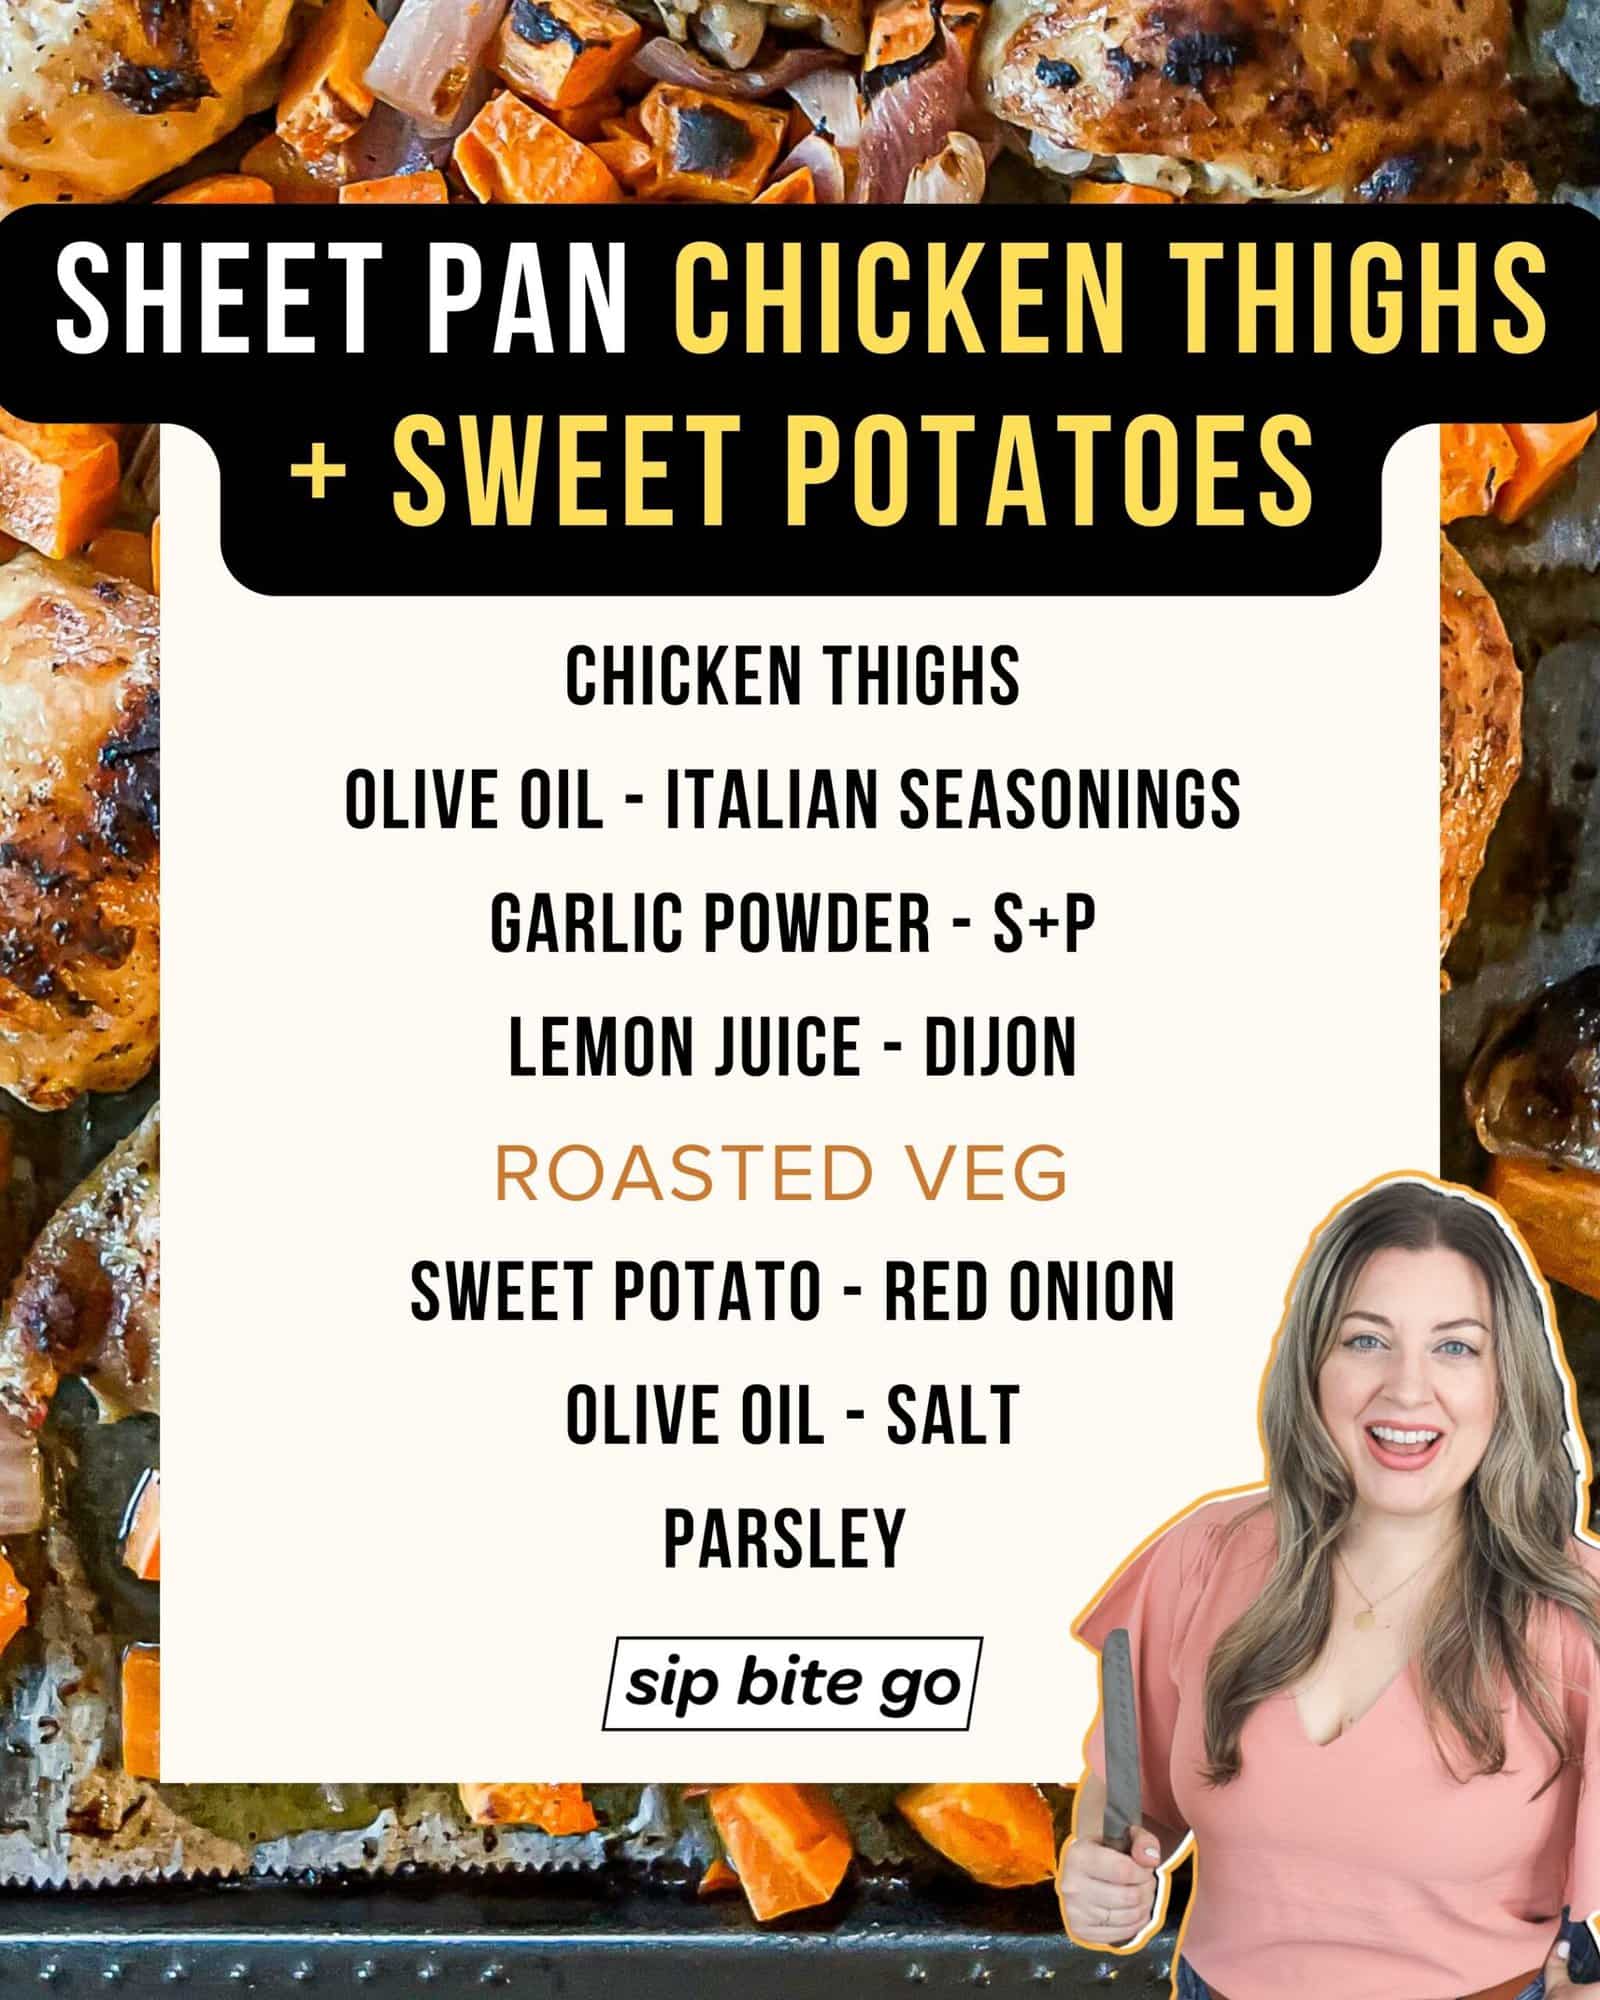 Infographic with list of ingredients to make sheet pan chicken thigh dinner with vegetables